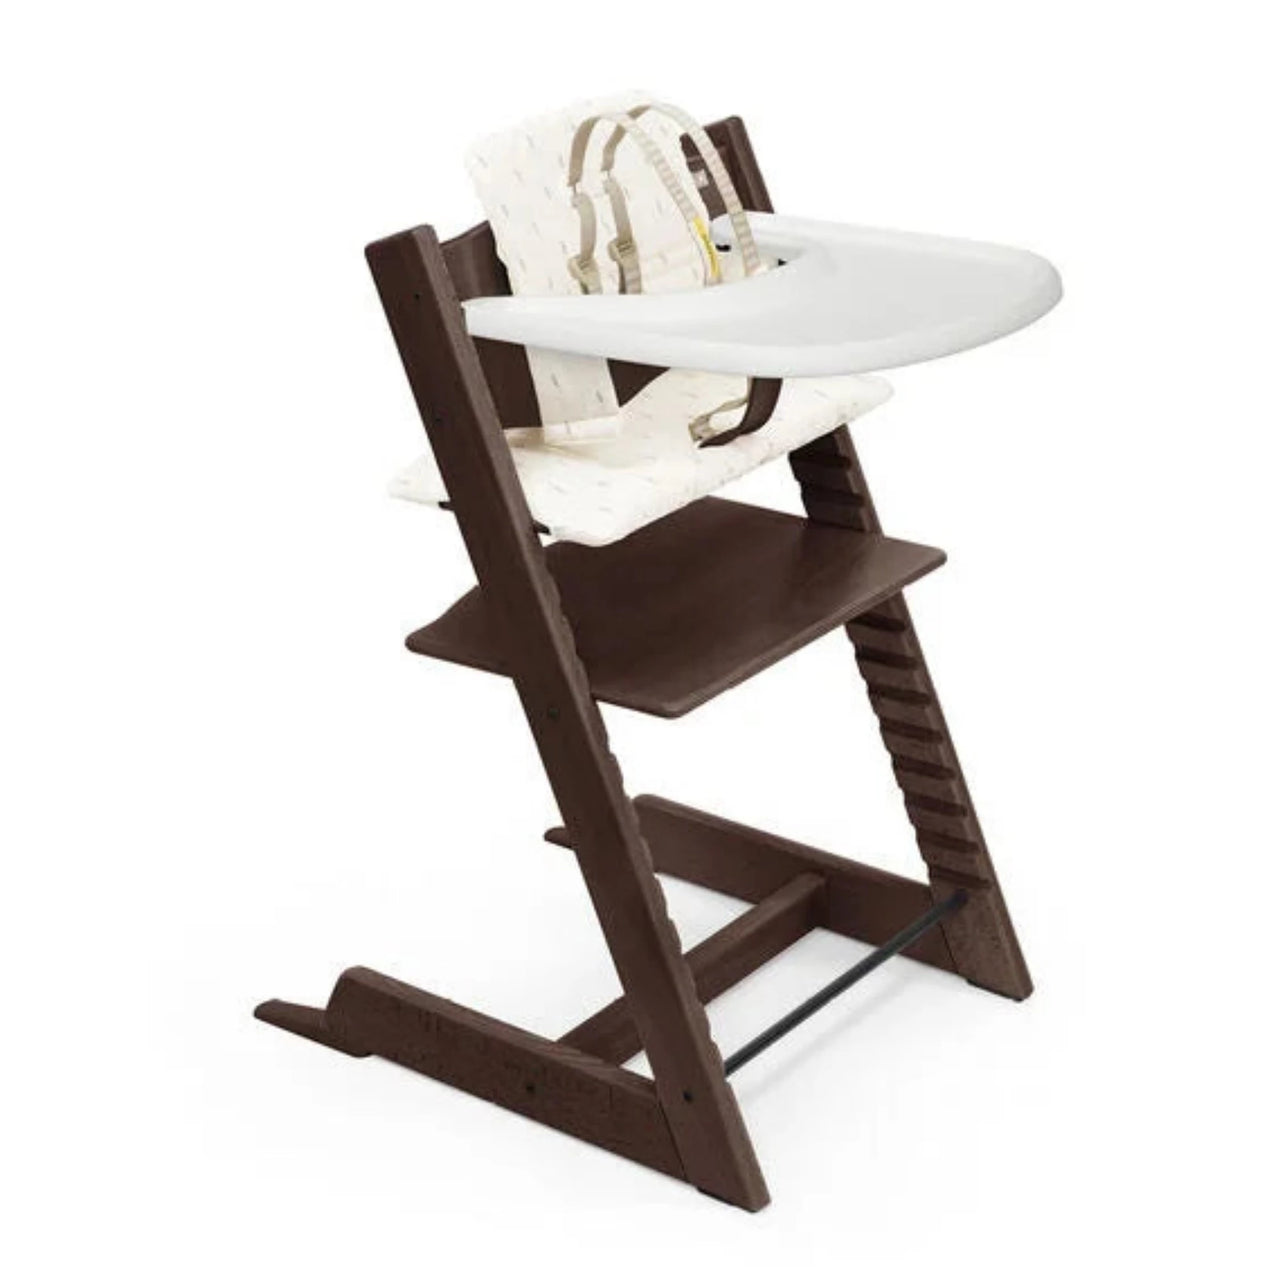 STOKKE Tripp Trapp Complete High Chair